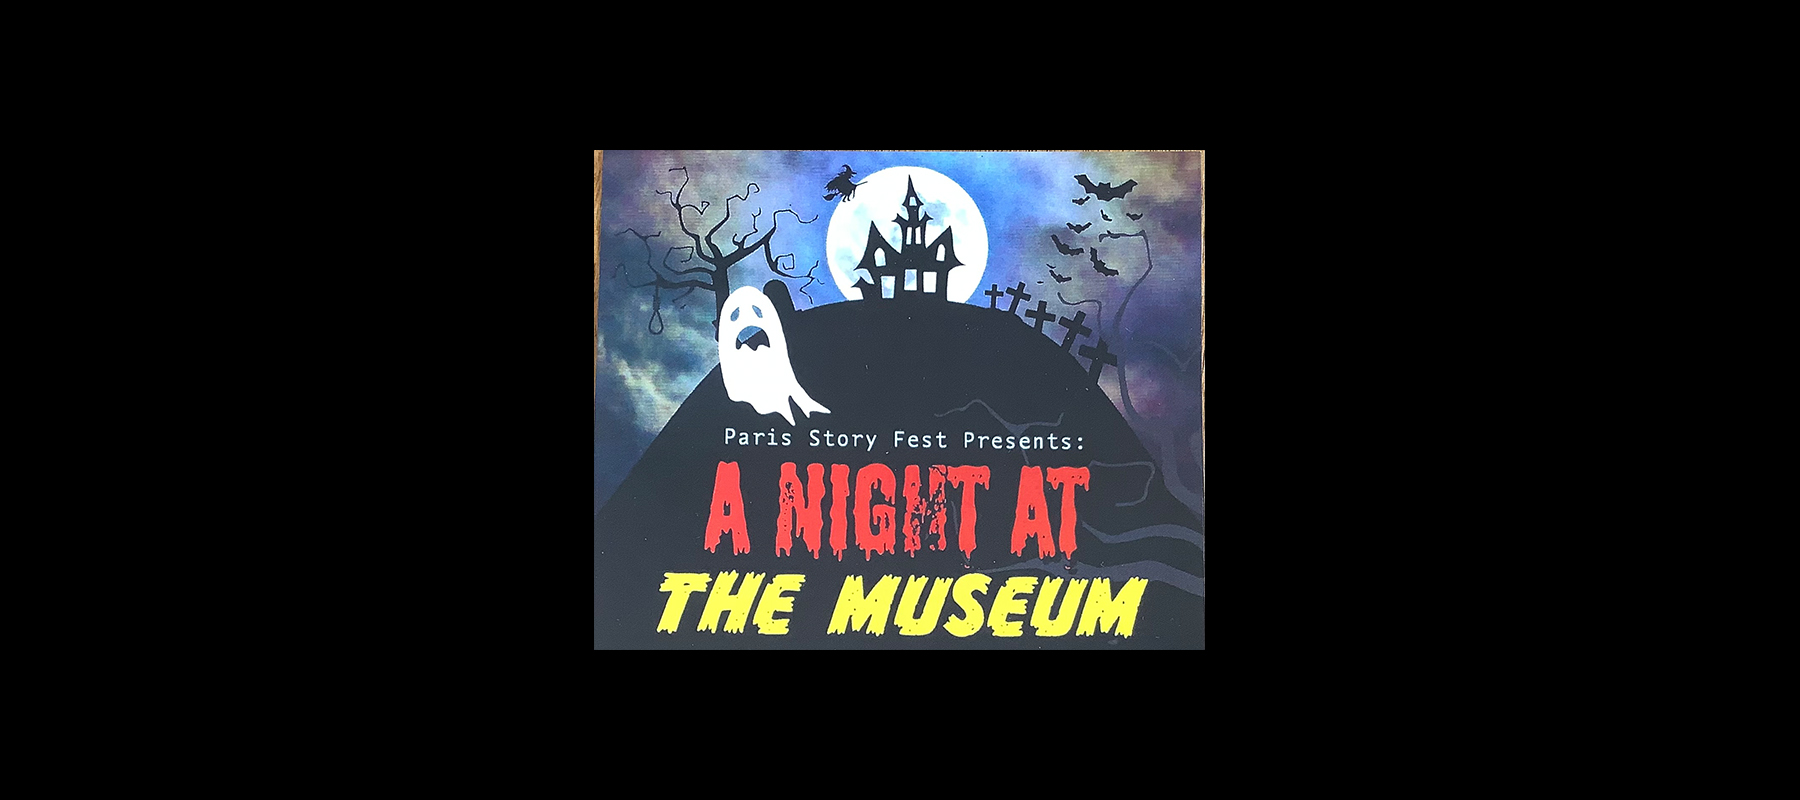 Paris Story Fest Presents: A Night at the Museum